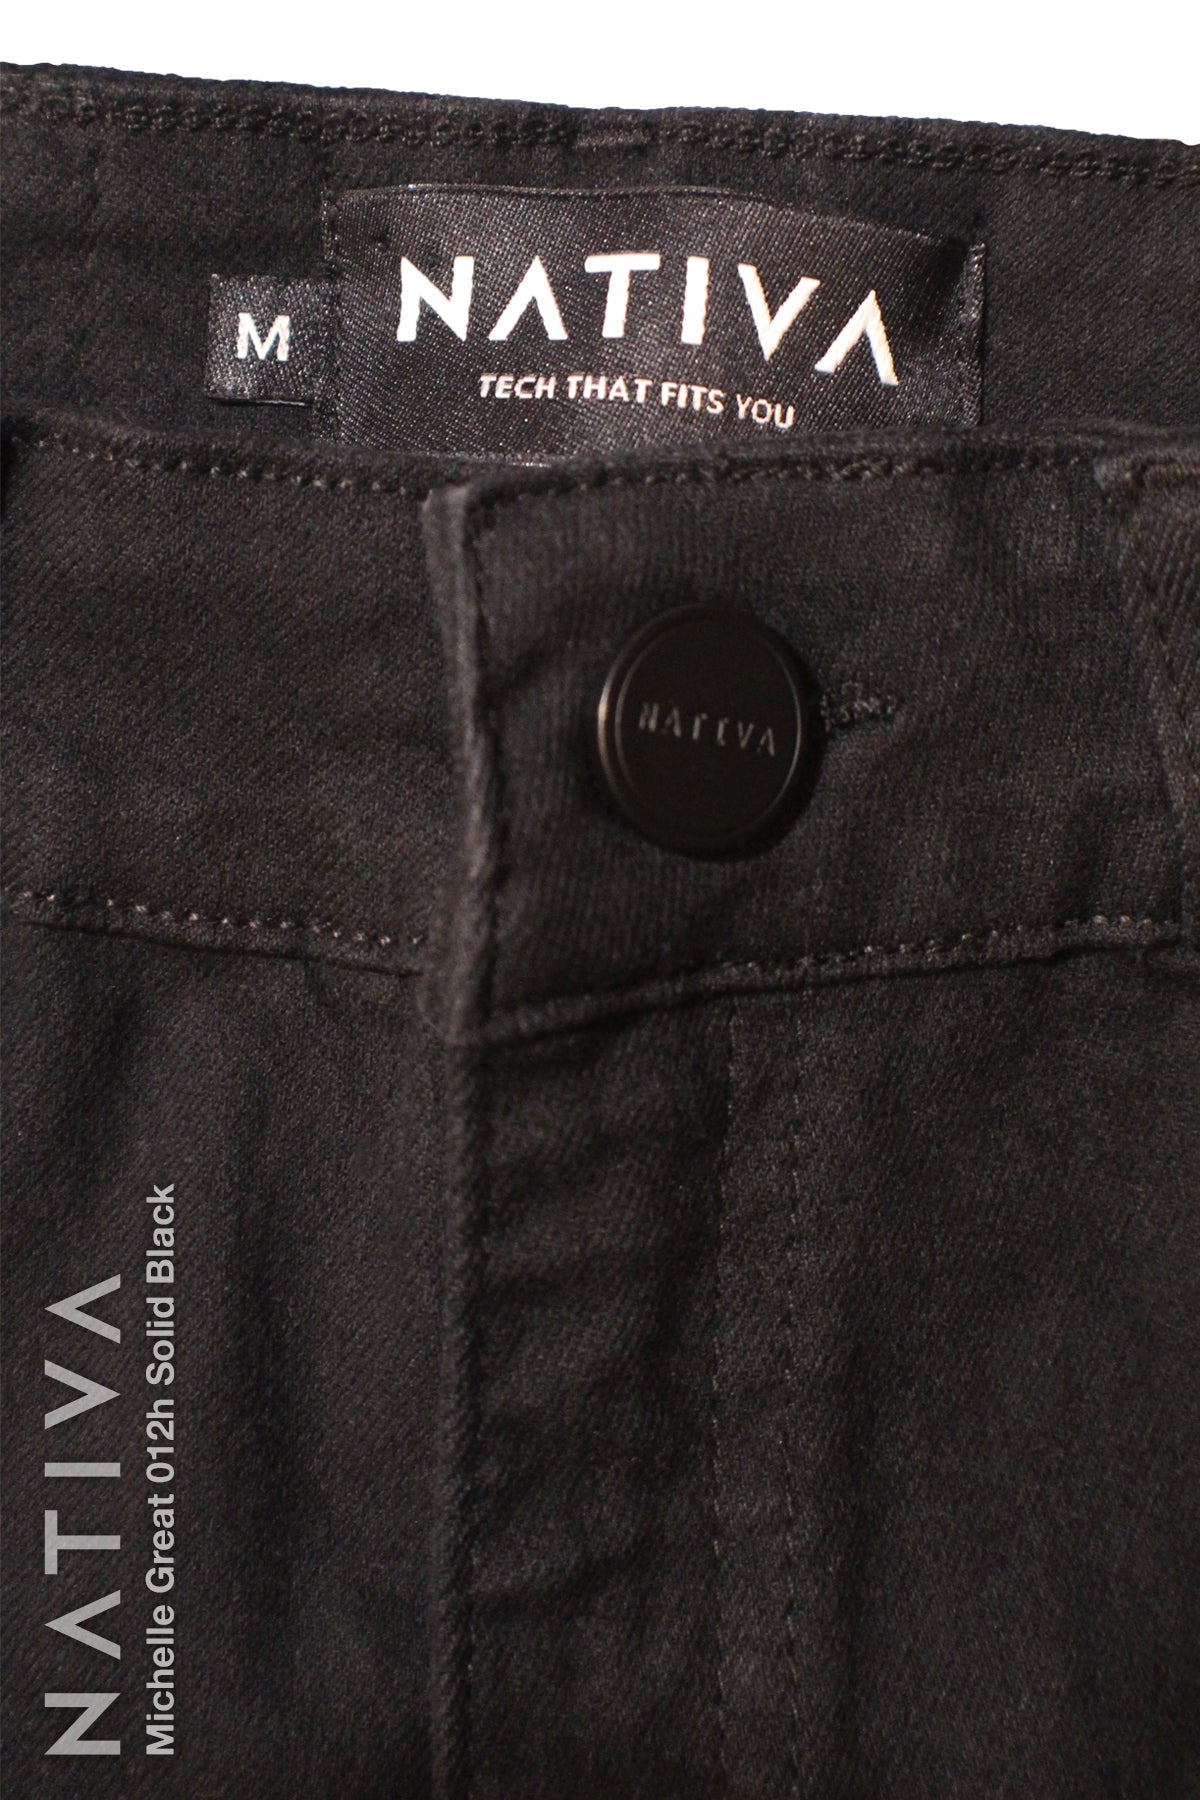 NATIVA, STRETCH JEANS. MICHELLE GREAT 012H BLACK, High Shaping Capacity, All-Season Wear, Hi-Rise Distressed Super Skinny Jeans